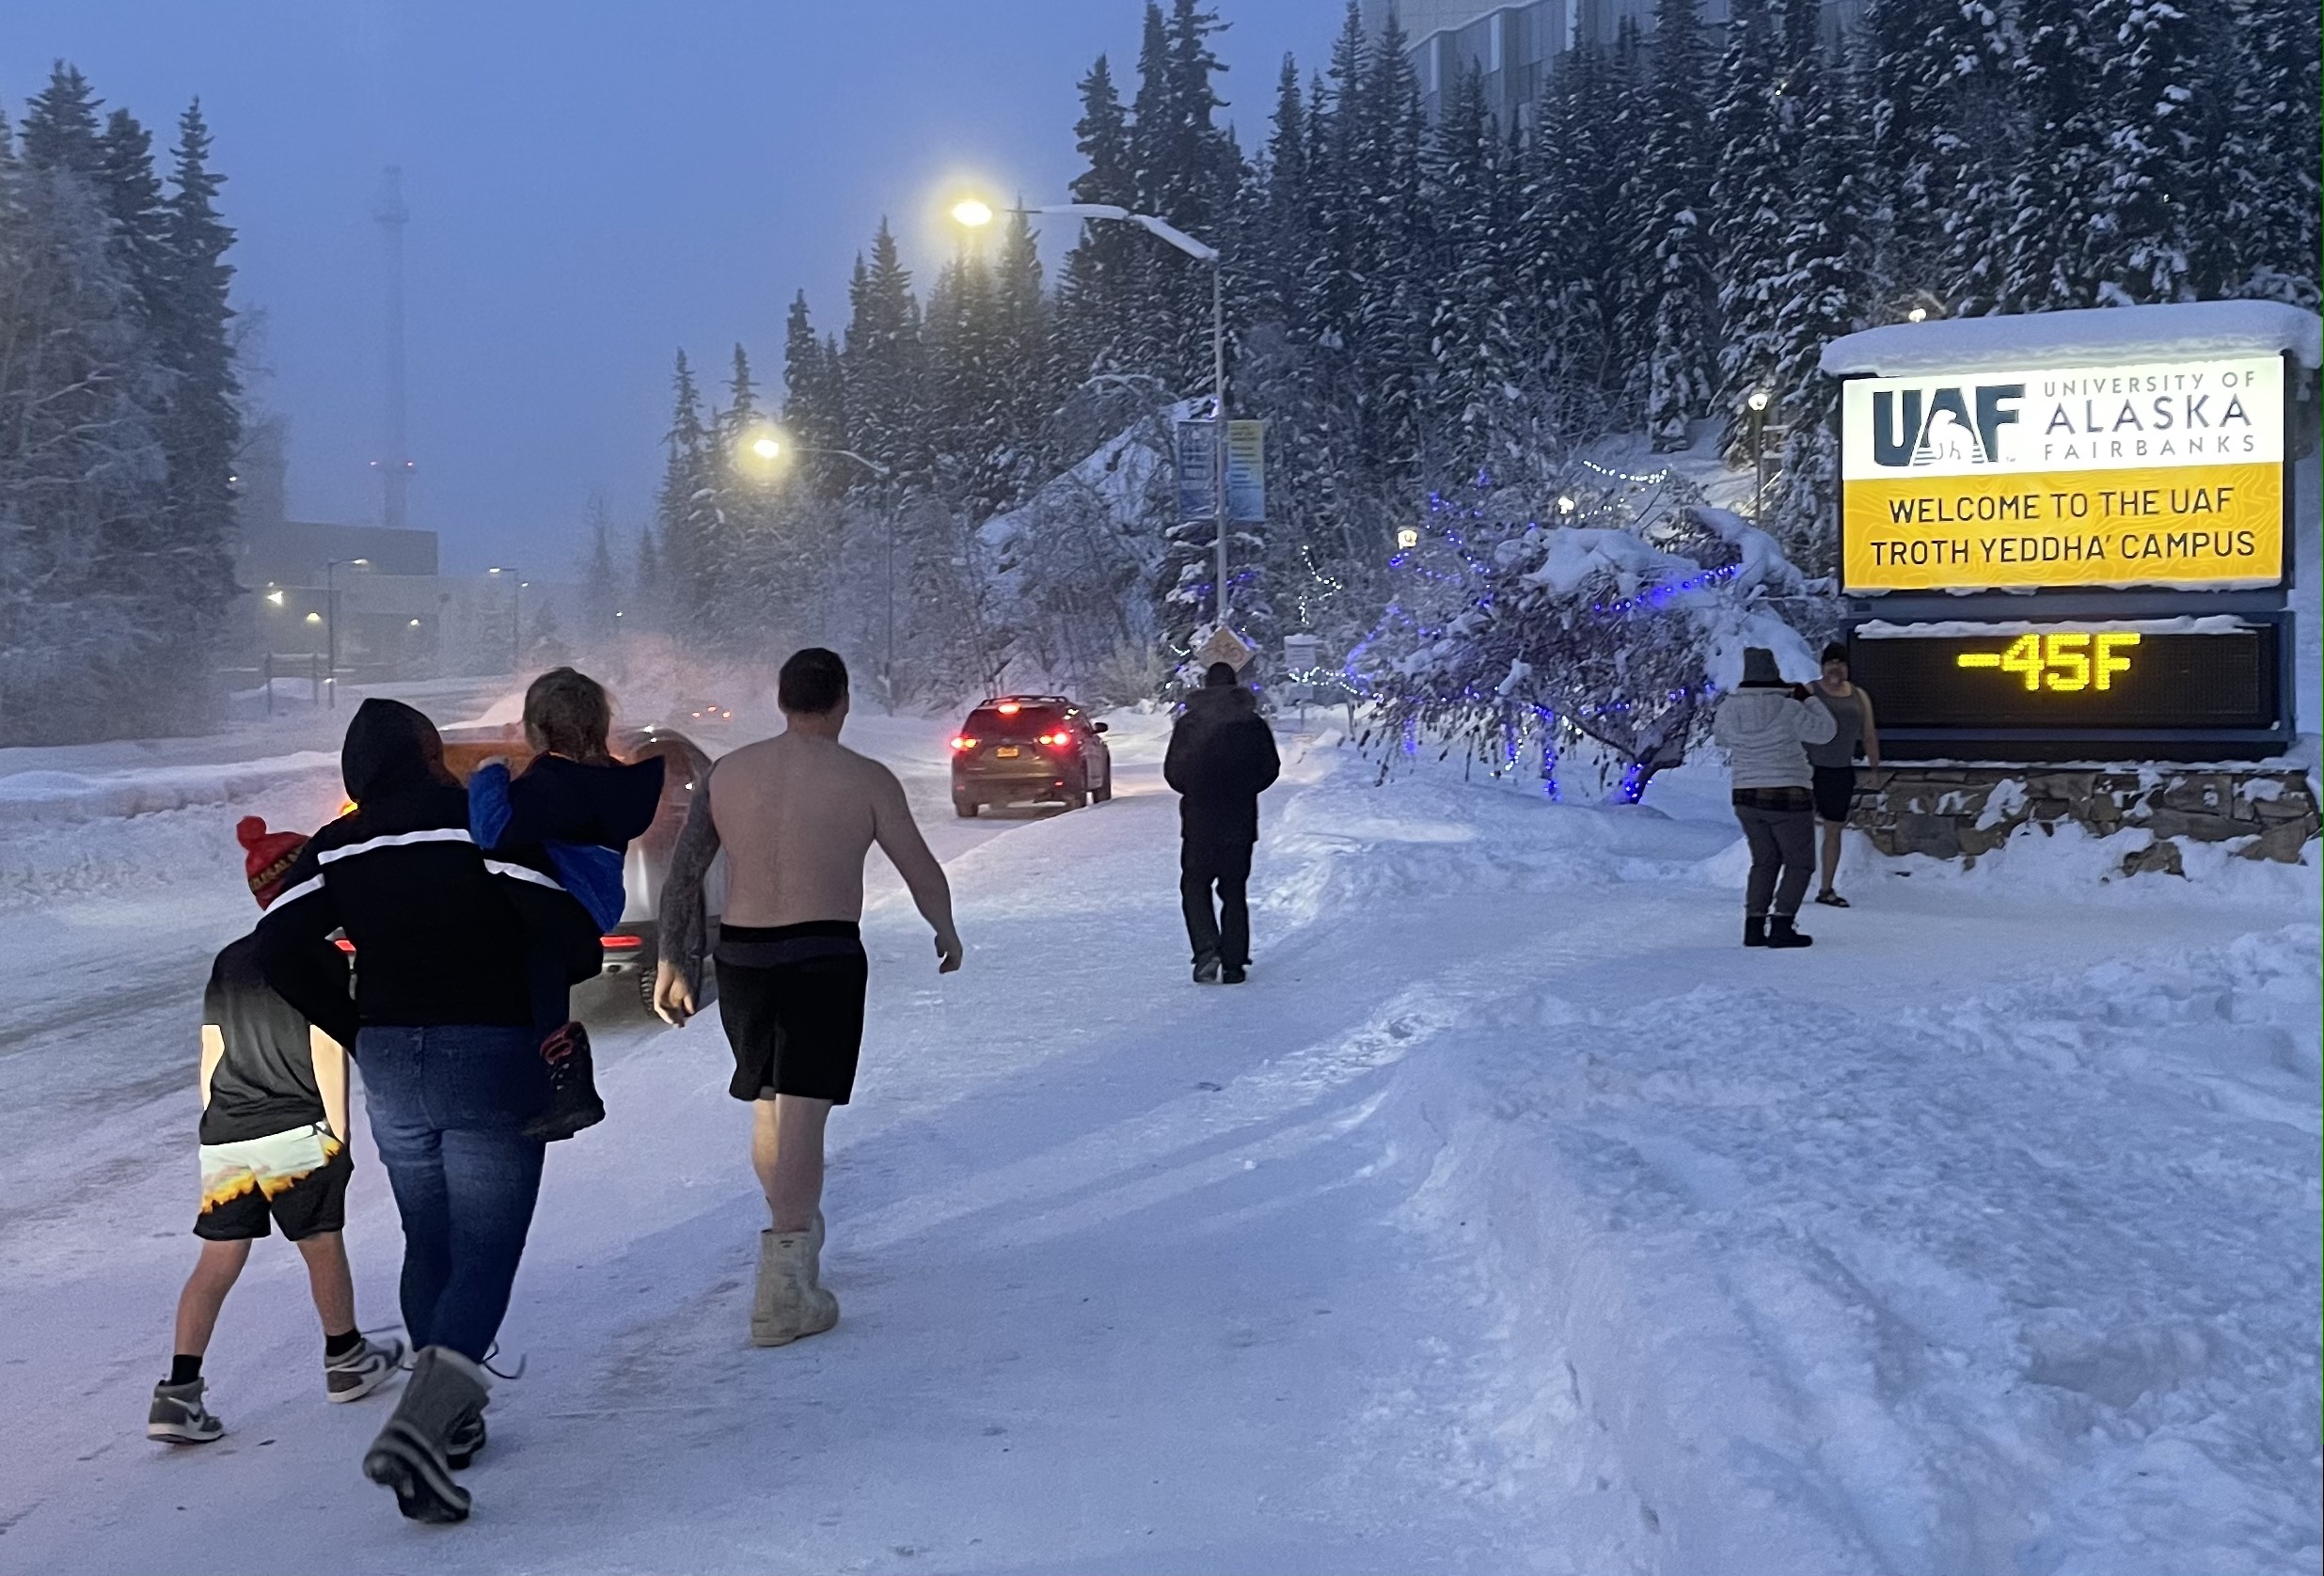 A group of people, some in swim shorts, walk across snow to stand in front of the UAF temperature sign, which reads -45 degrees F.